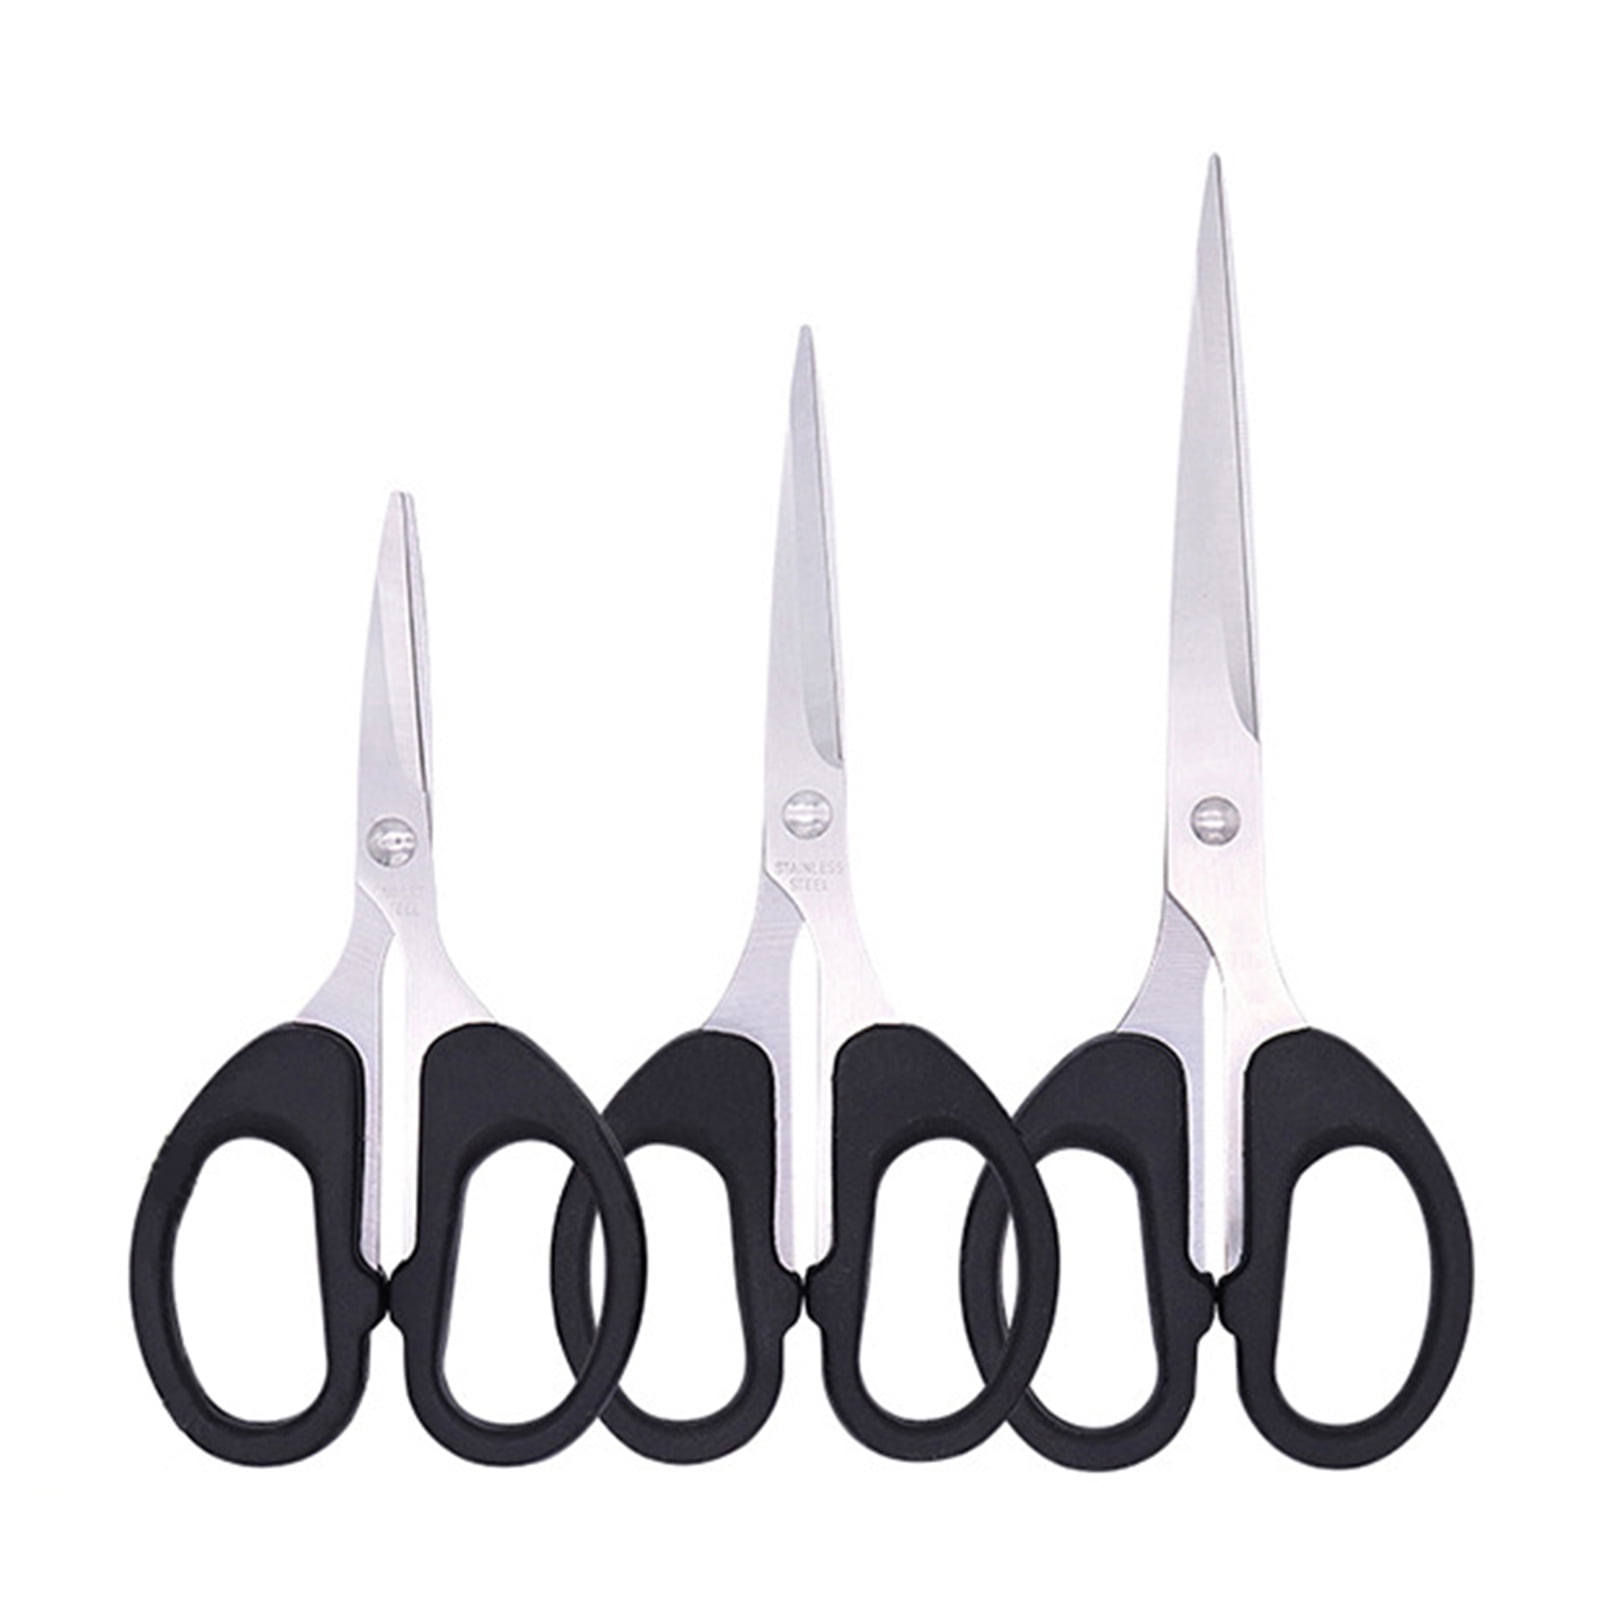 Jelly Comb Scissors, DIY Scissors 3 Pack, Multipurpose Scissors with Ultra  Sharp Blades, Comfortable Grip, Sturdy Sharp, Good for School Home Office  Art Craft Sewing Tailor Heavy Duty 